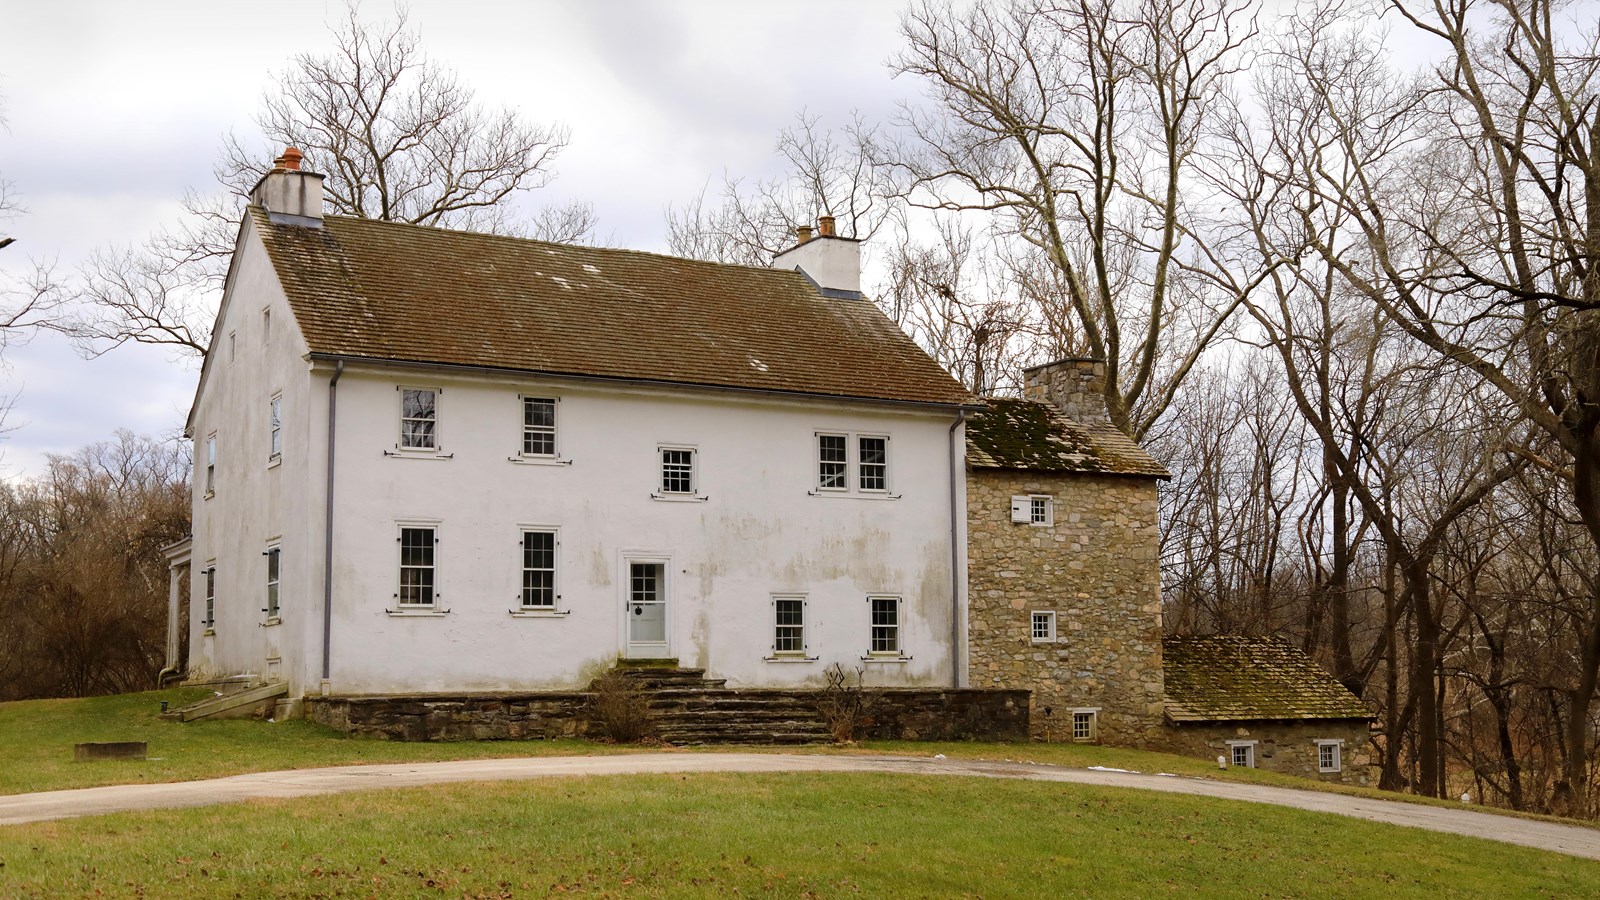 a two-story farmhouse with white siding and an older stone section on the right side